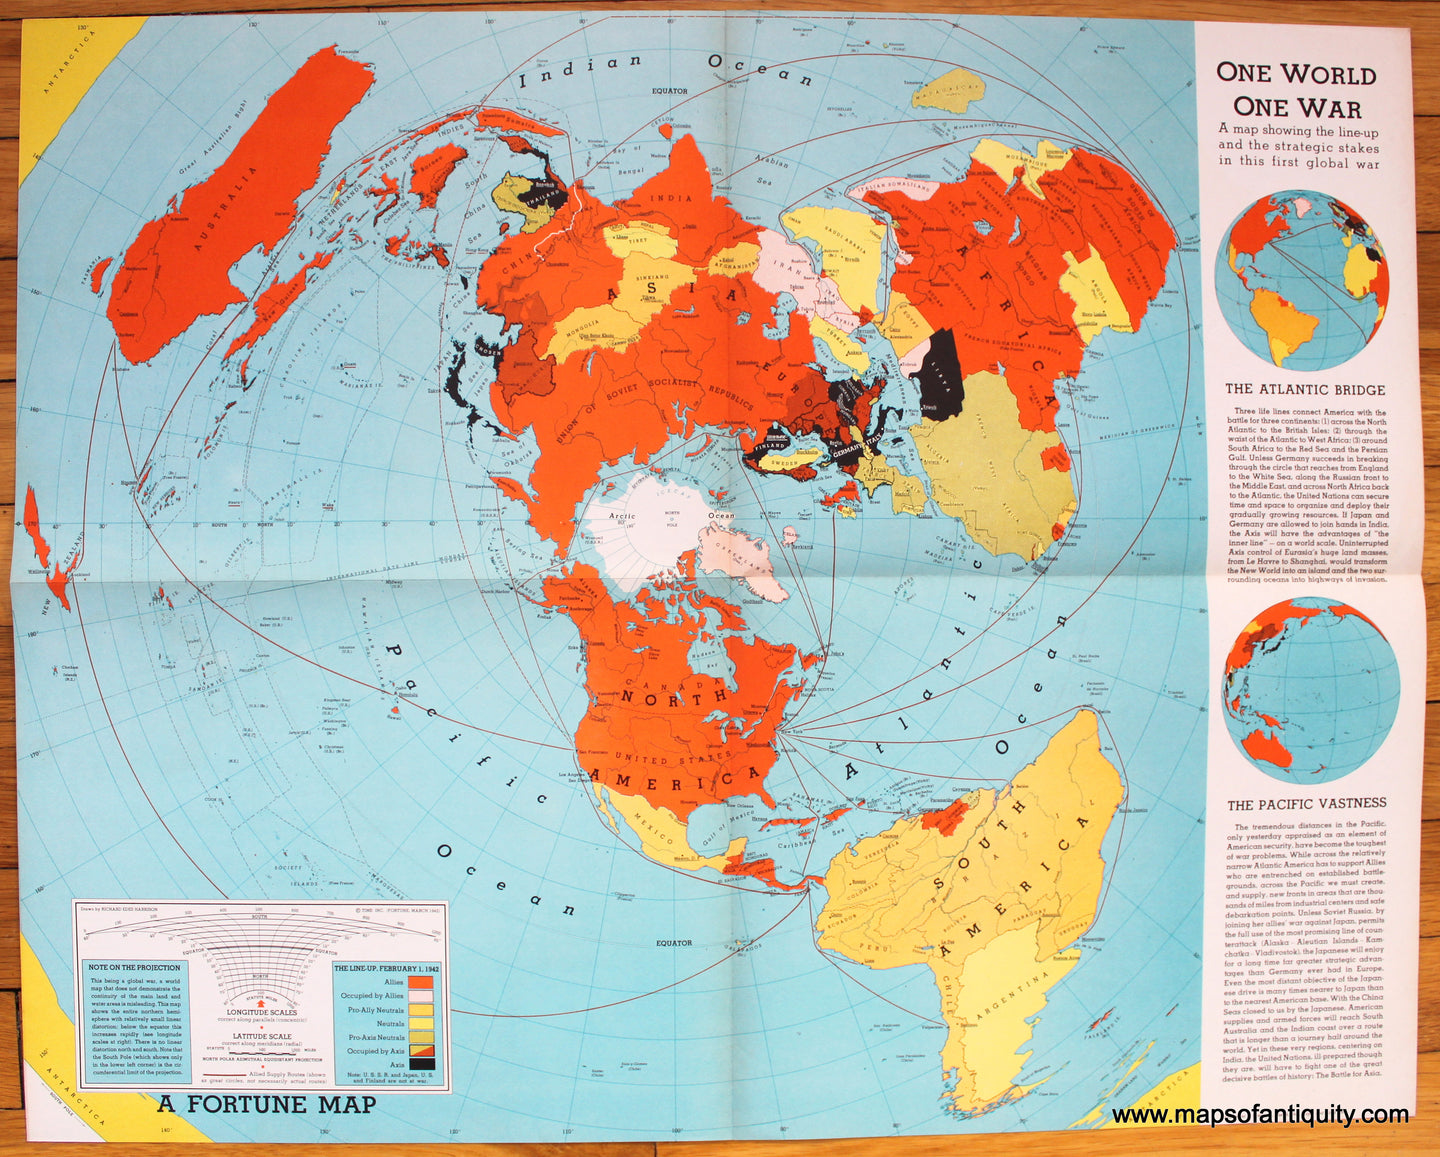 Antique-Map-One-World-One-War-First-Great-Global-Military-History-Fortune-Magazine-1942-1940s-1900s-Early-Mid-20th-Century-Maps-of-Antiquity